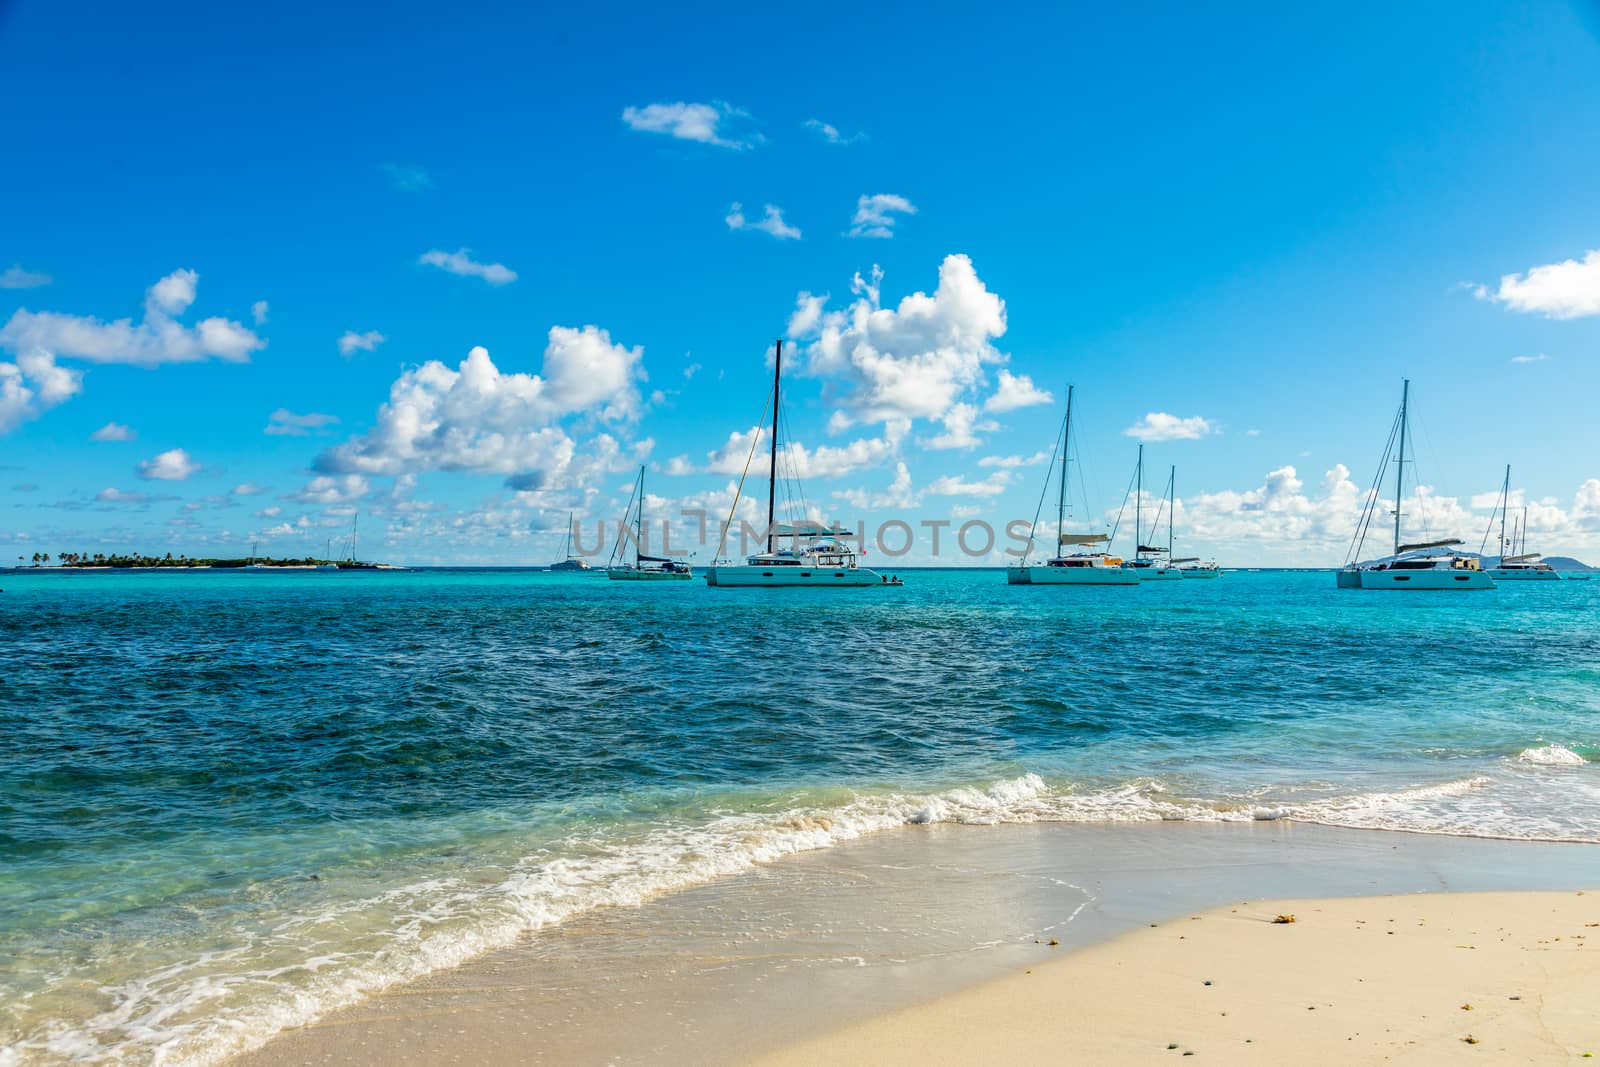 Turquoise colored sea with ancored yachts and catamarans, Tobago Cays tropical islands, Saint Vincent and the Grenadines, Caribbean sea